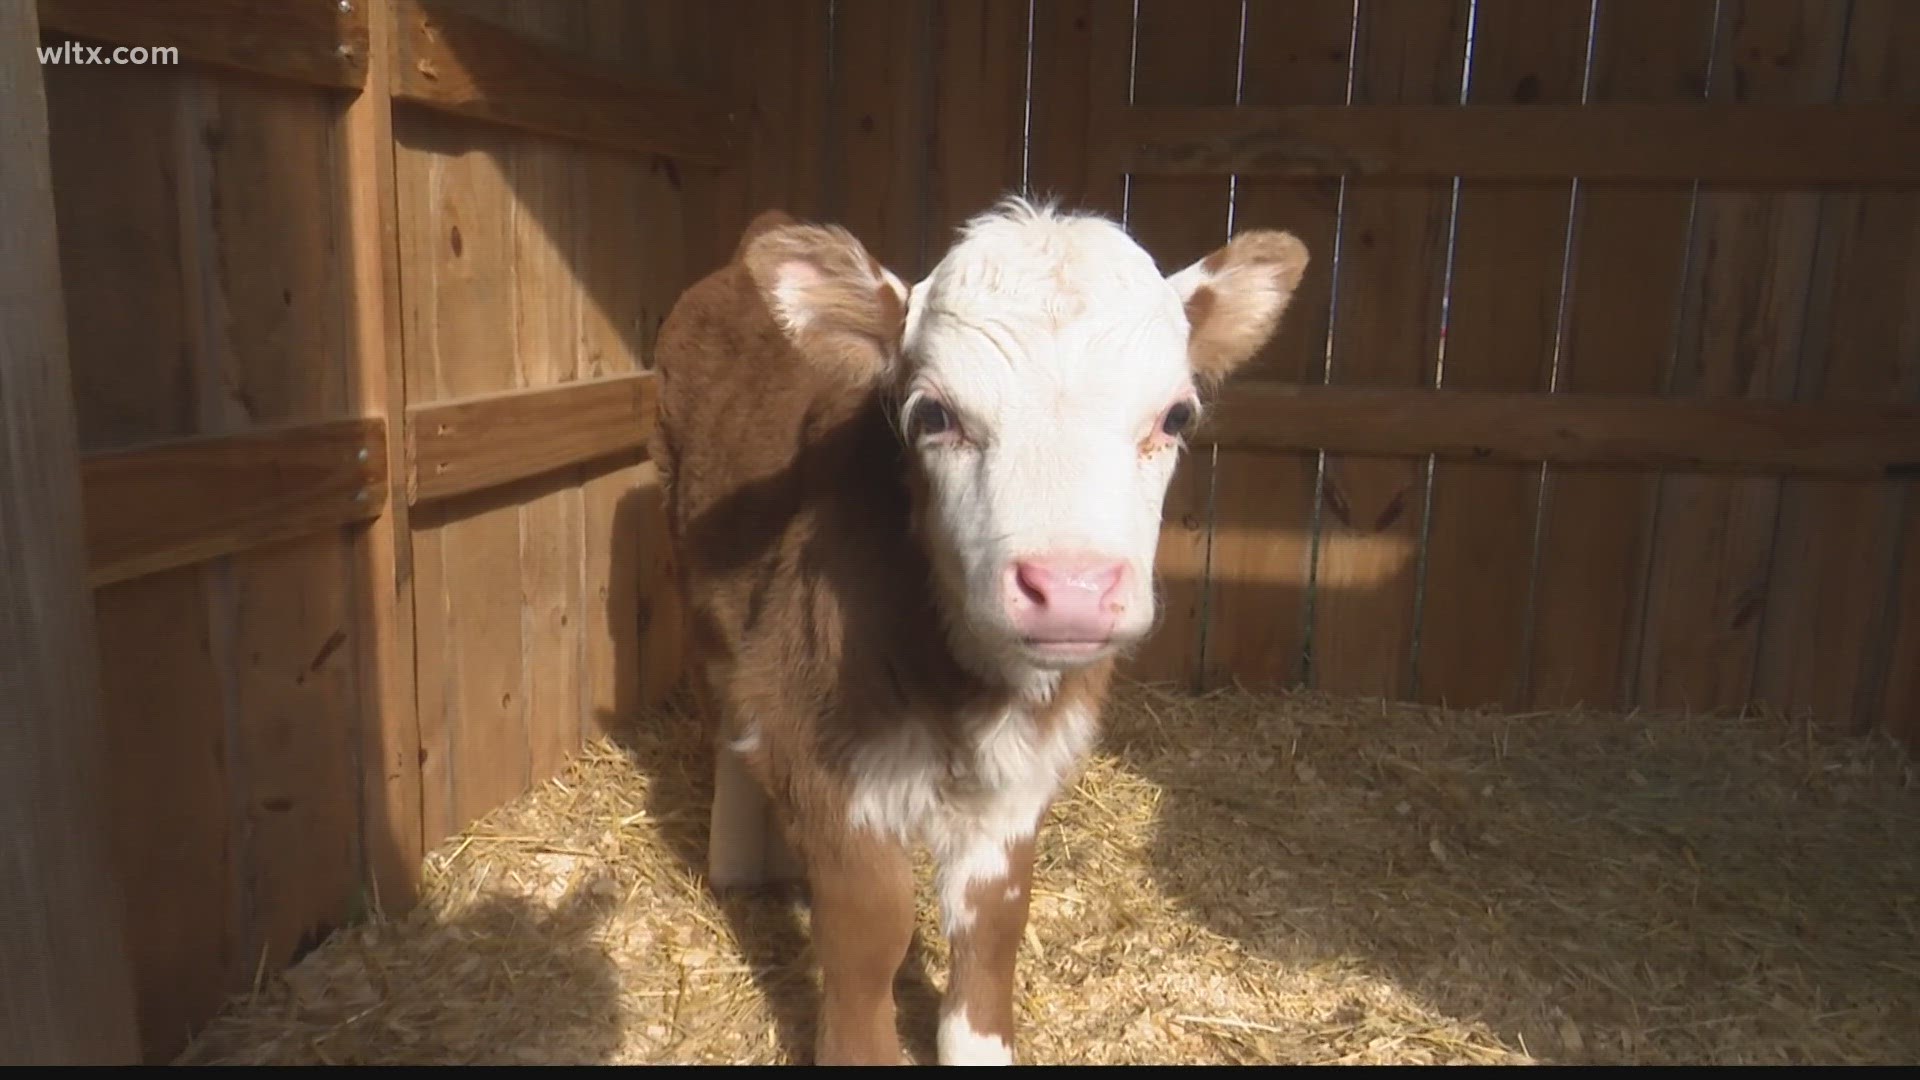 The biggest new thing on the Keenan High School campus is a mini bovine named Teddi